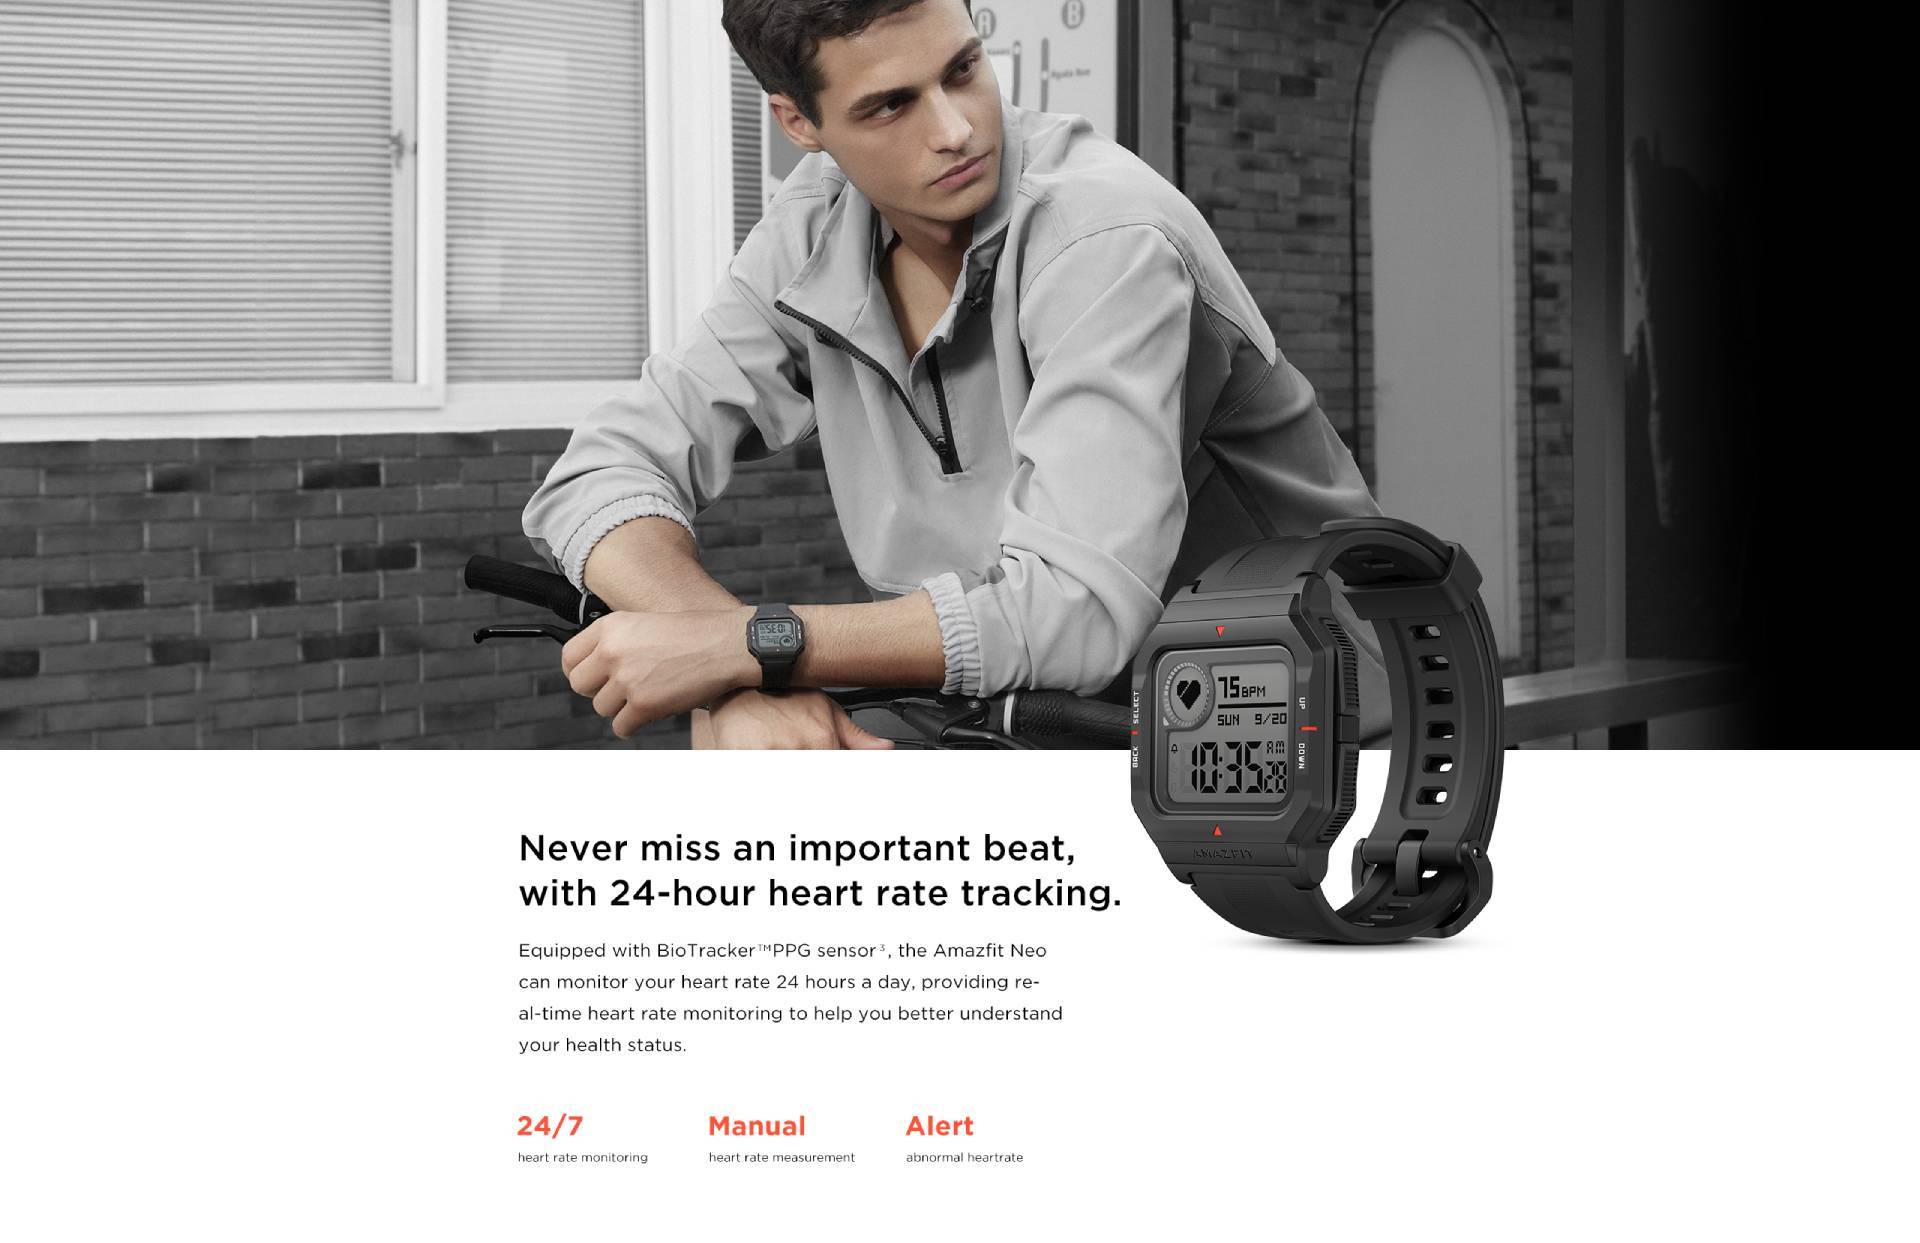 AmazFit Neo Smartwatch – A Casio Retro Flashback with Basic Smart Functions  – Tech4all - Let's Inspect Cool Tech